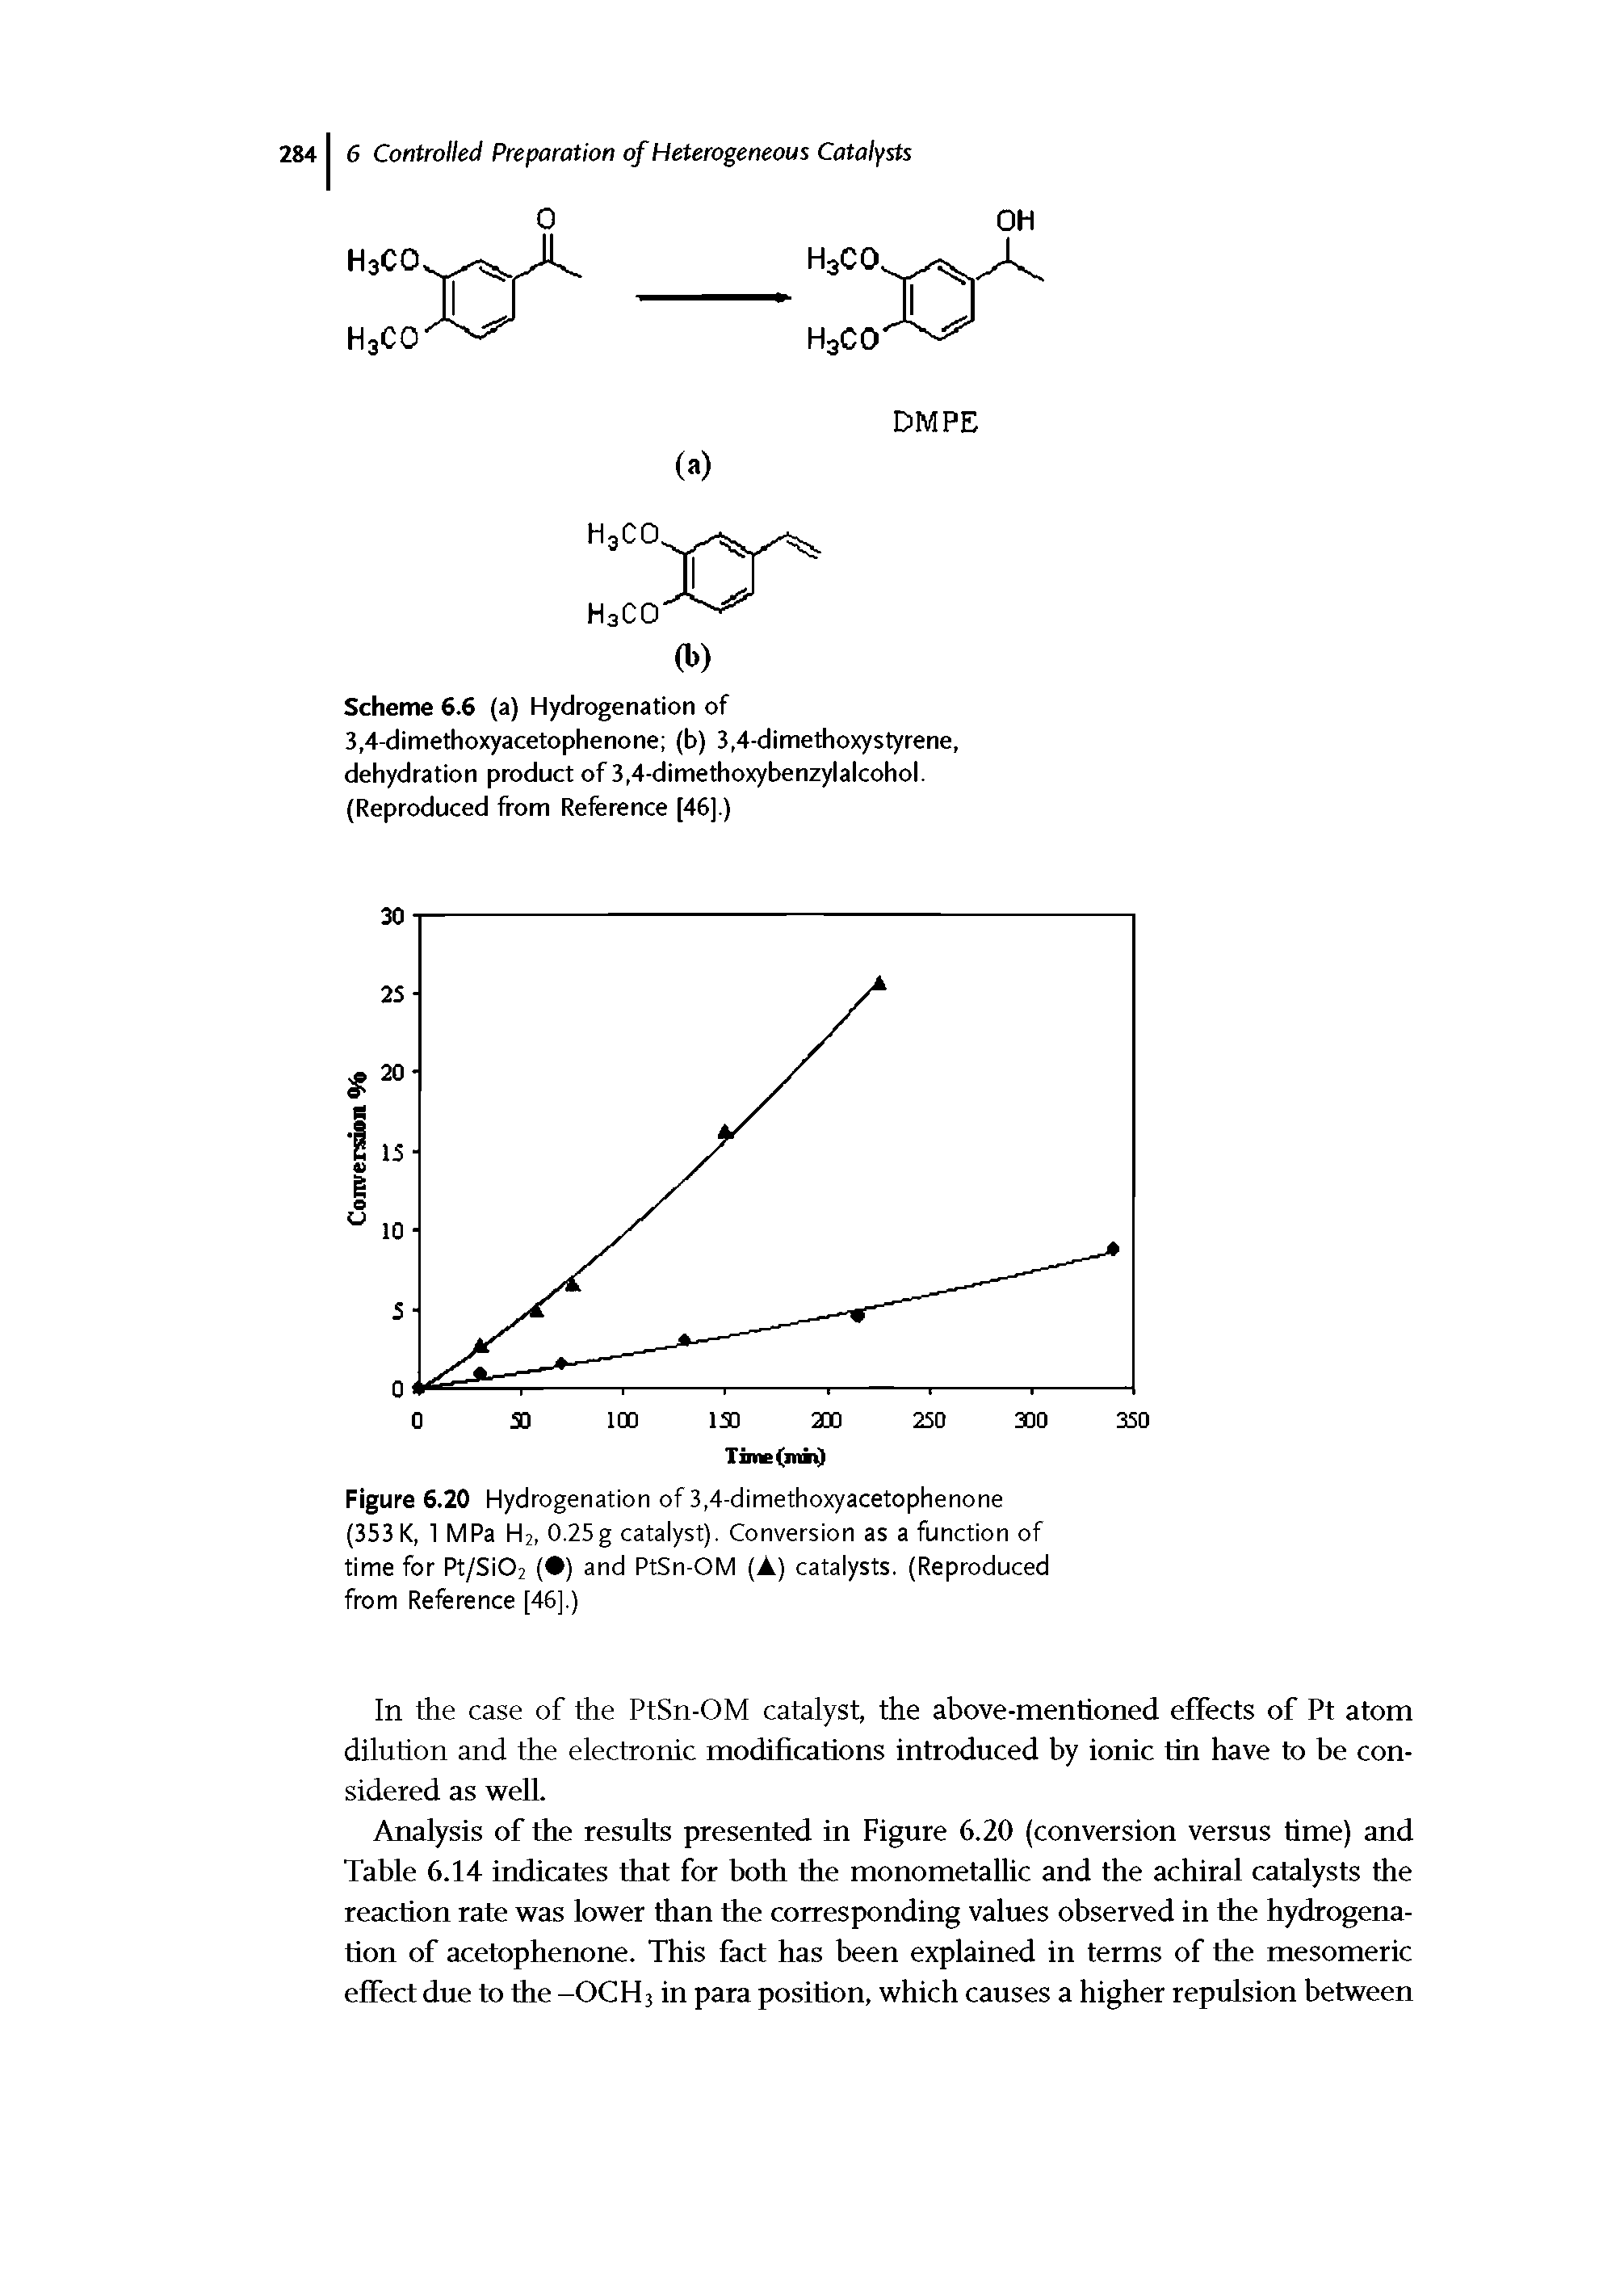 Figure 6.20 Hydrogenation of 3,4-dimethoxyacetophenone (353 K, 1 MPa H2, 0.25g catalyst). Conversion as a function of time for Pt/Si02 ( ) and PtSn-OM (A) catalysts. (Reproduced from Reference [46].)...